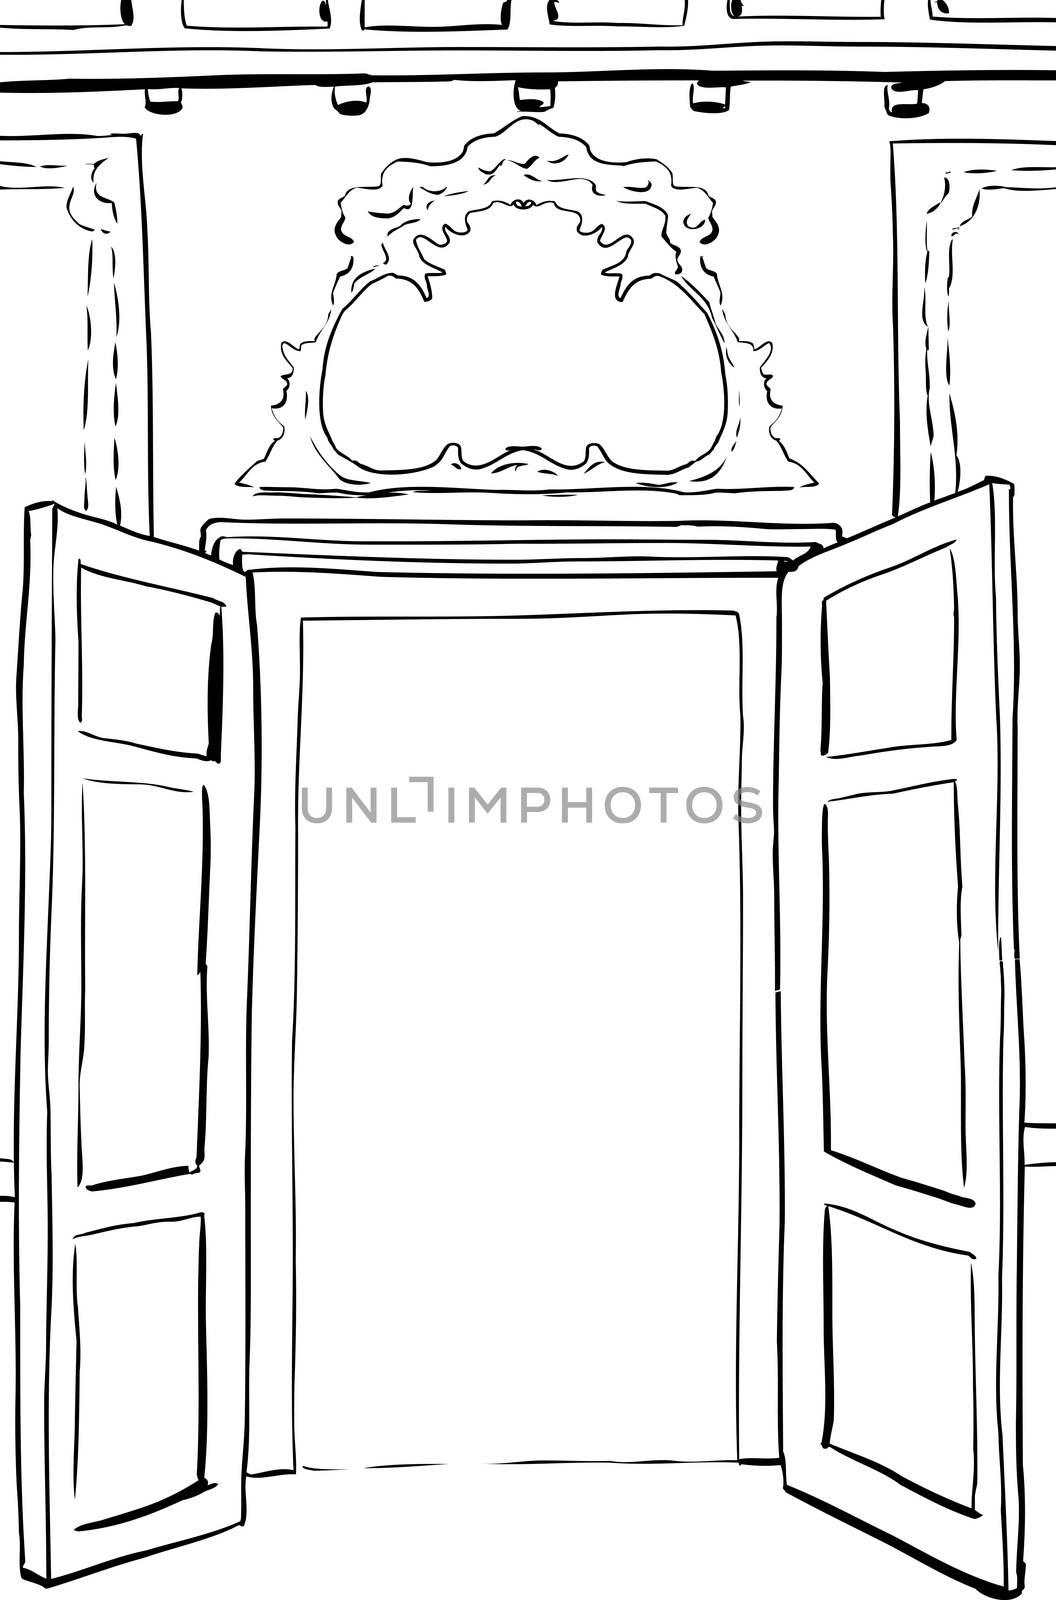 Outlined Rococo Doors Illustration by TheBlackRhino